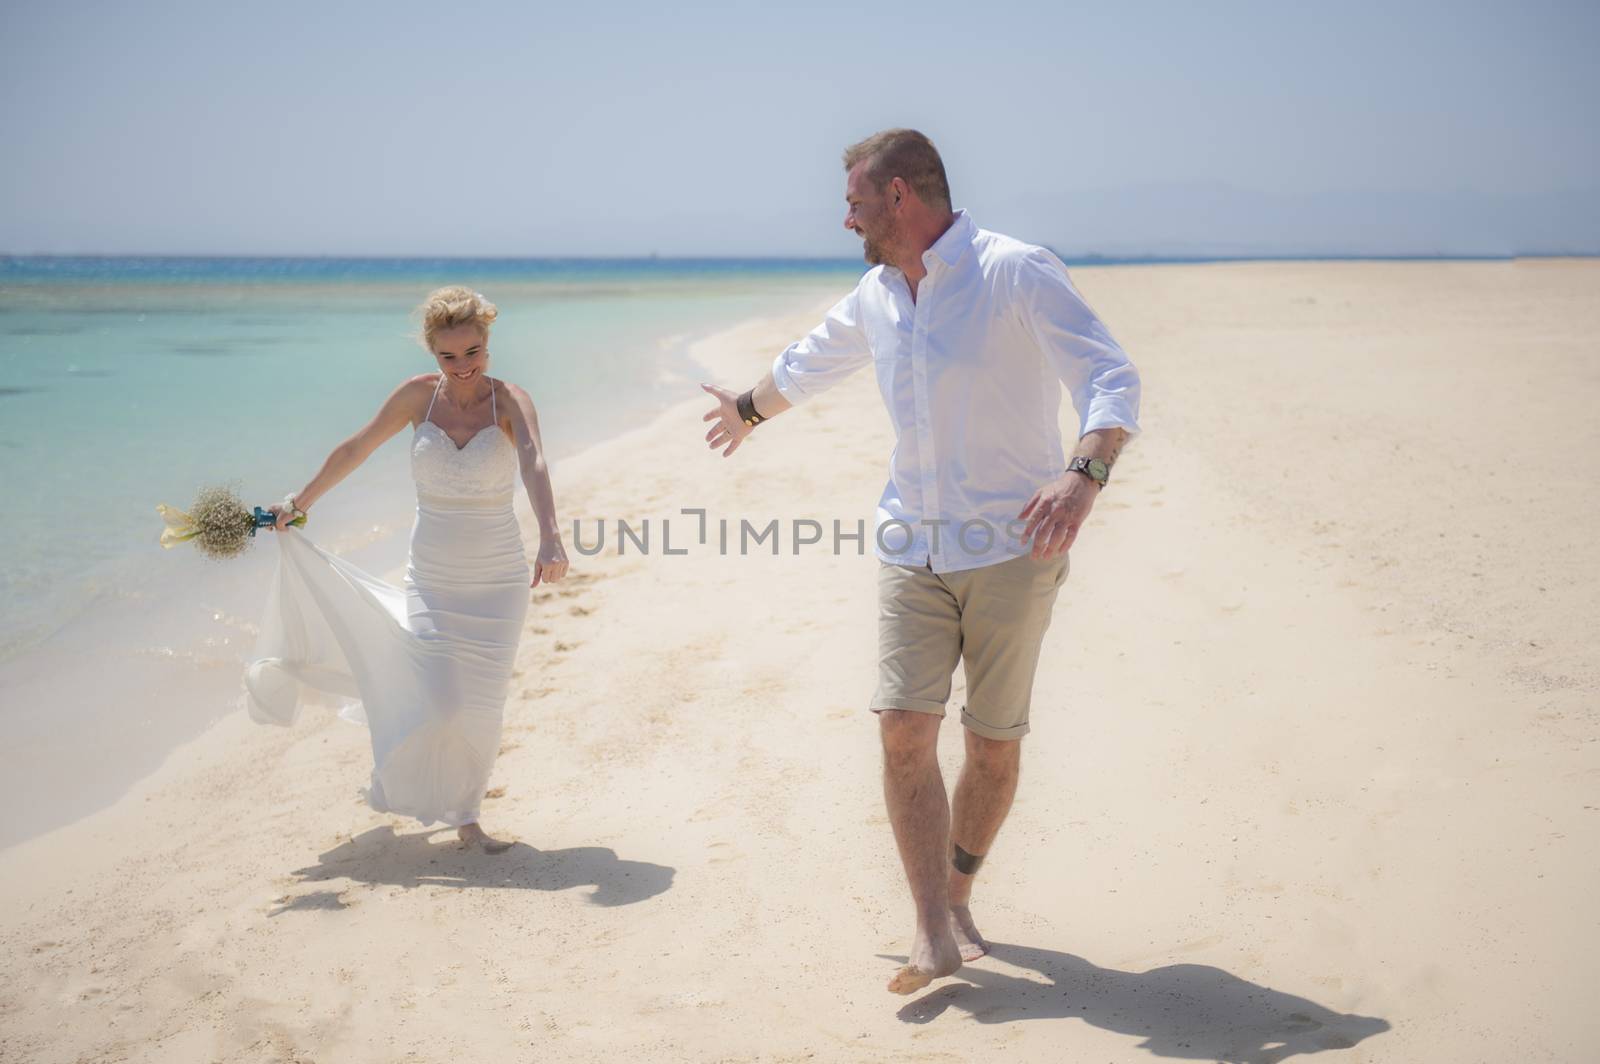 Beautiful couple walking together at a tropical beach paradise on wedding day in white gown dress with ocean view